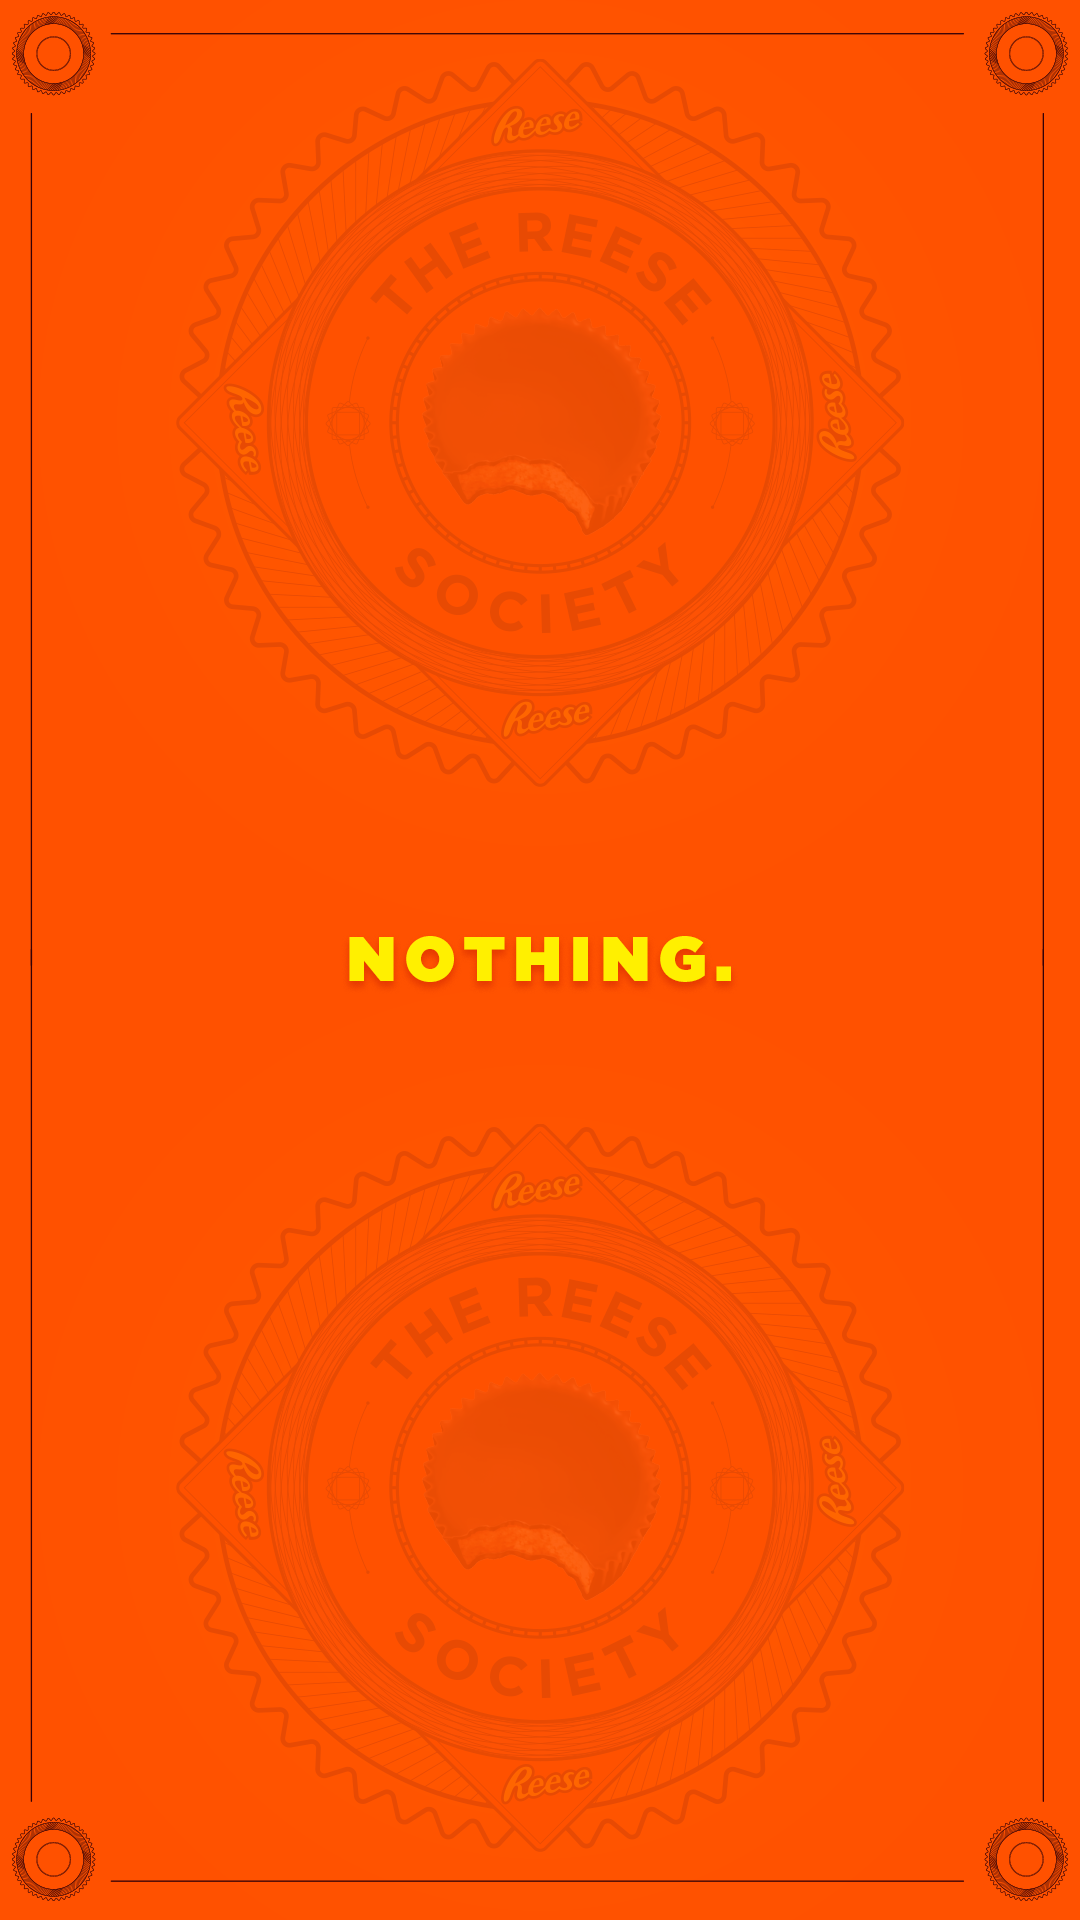 Reese-Society-IG_0046_Nothing.png